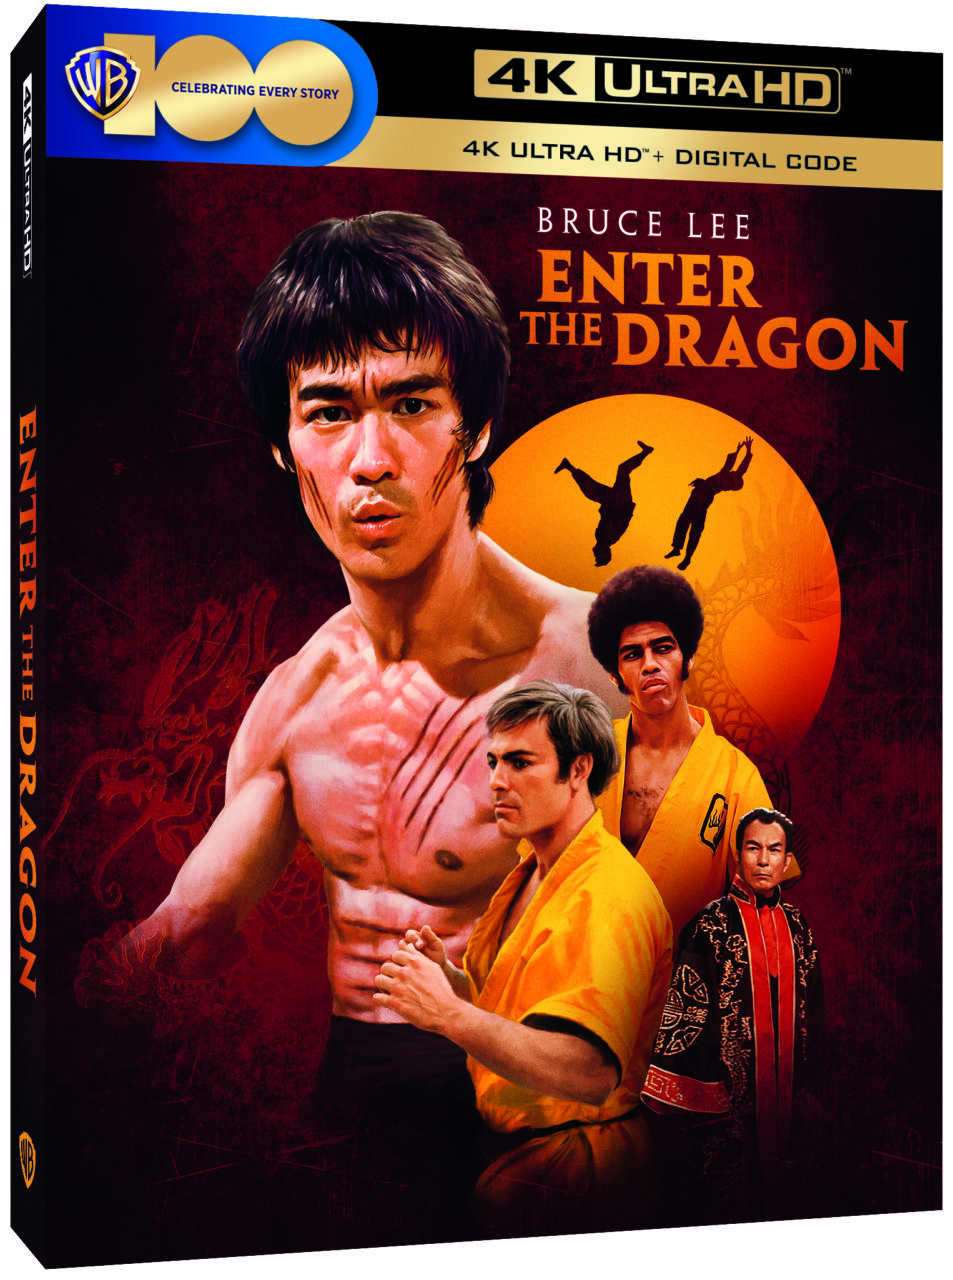 Enter The Dragon 4K Ultra HD Combo Pack 50th Anniversary cover (Warner Bros. Discovery Home Entertainment)